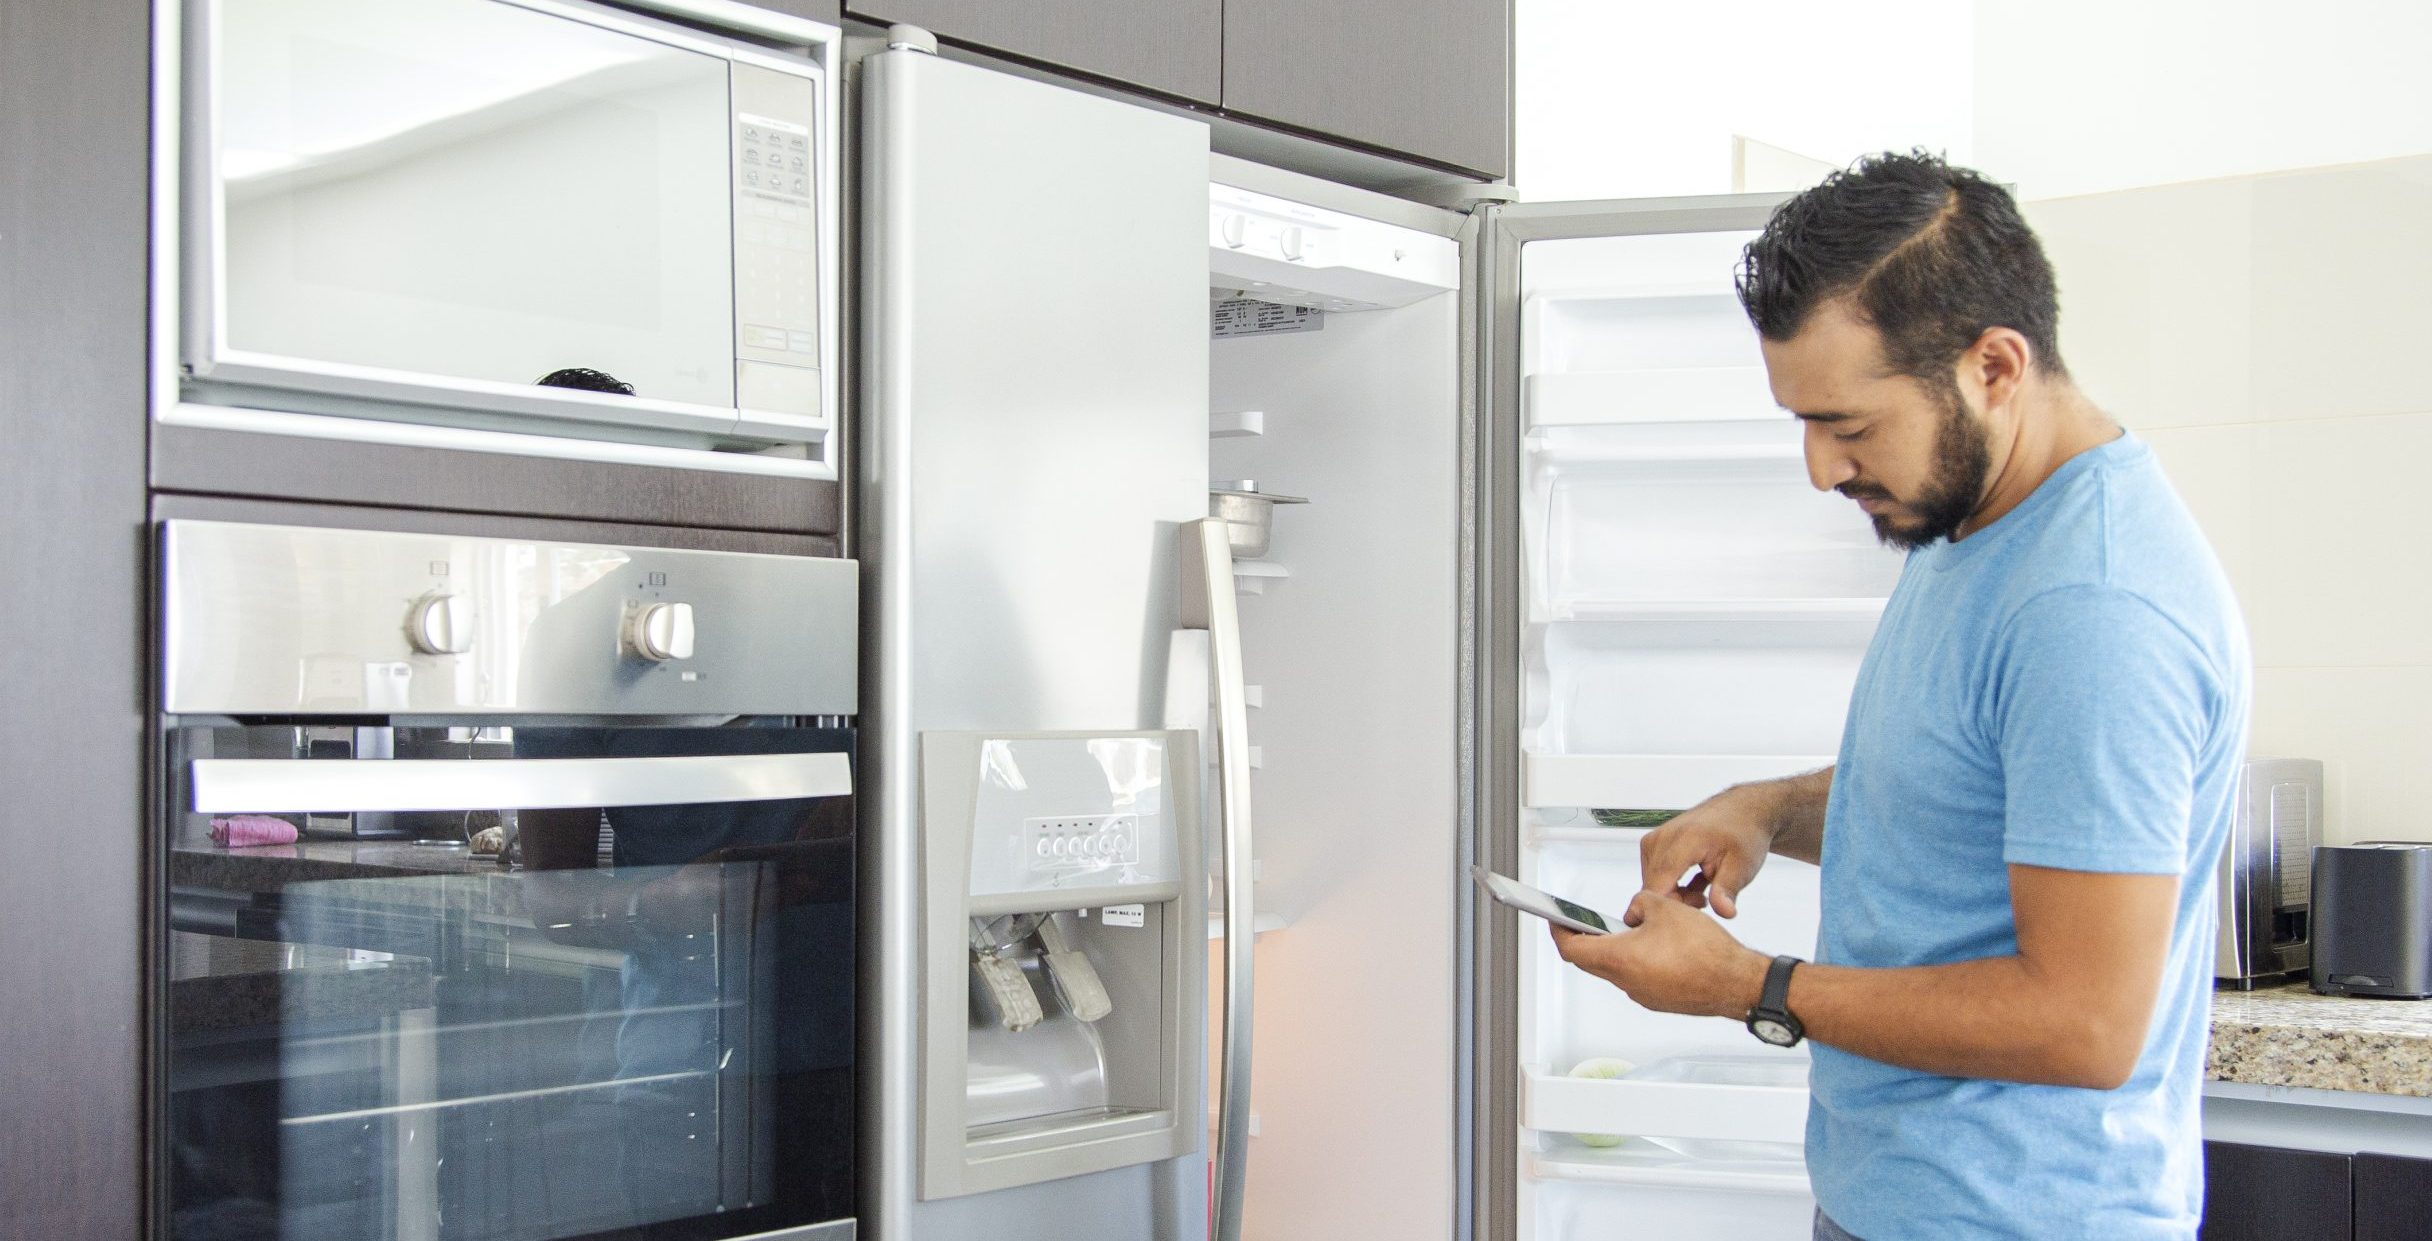 Homeowner looking inside fridge while consulting phone